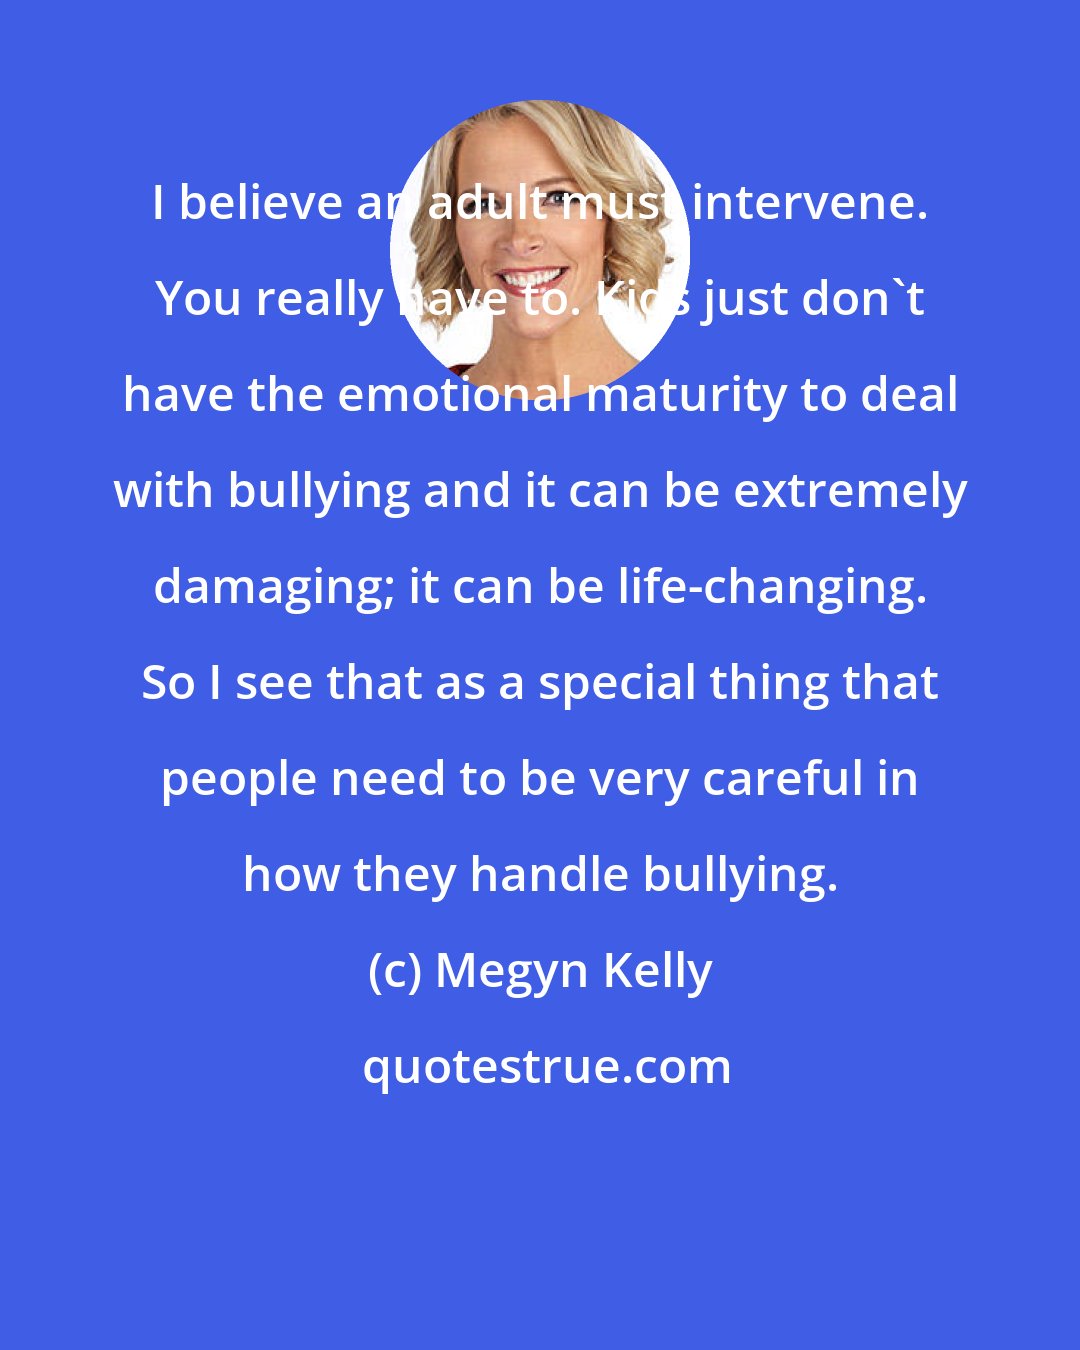 Megyn Kelly: I believe an adult must intervene. You really have to. Kids just don't have the emotional maturity to deal with bullying and it can be extremely damaging; it can be life-changing. So I see that as a special thing that people need to be very careful in how they handle bullying.